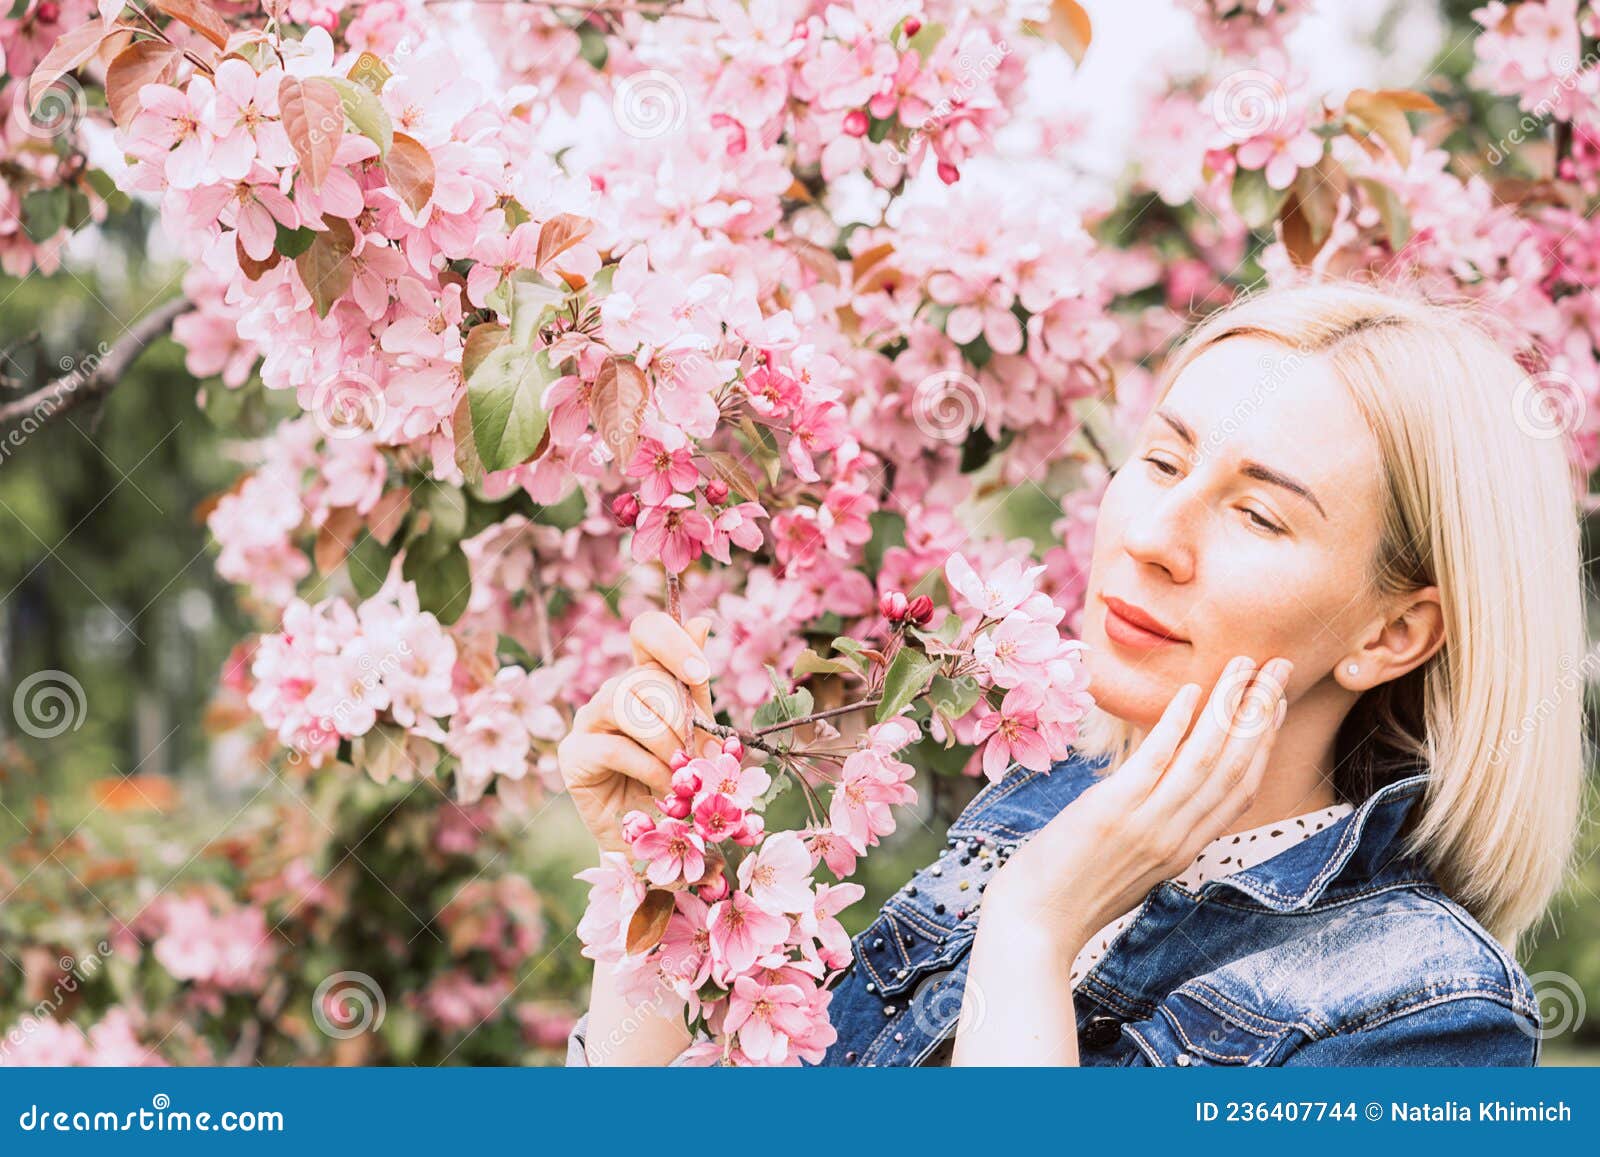 Young Woman Among The Blossoming Trees Spring Nature Park Or Garden Flowering Trees Stock